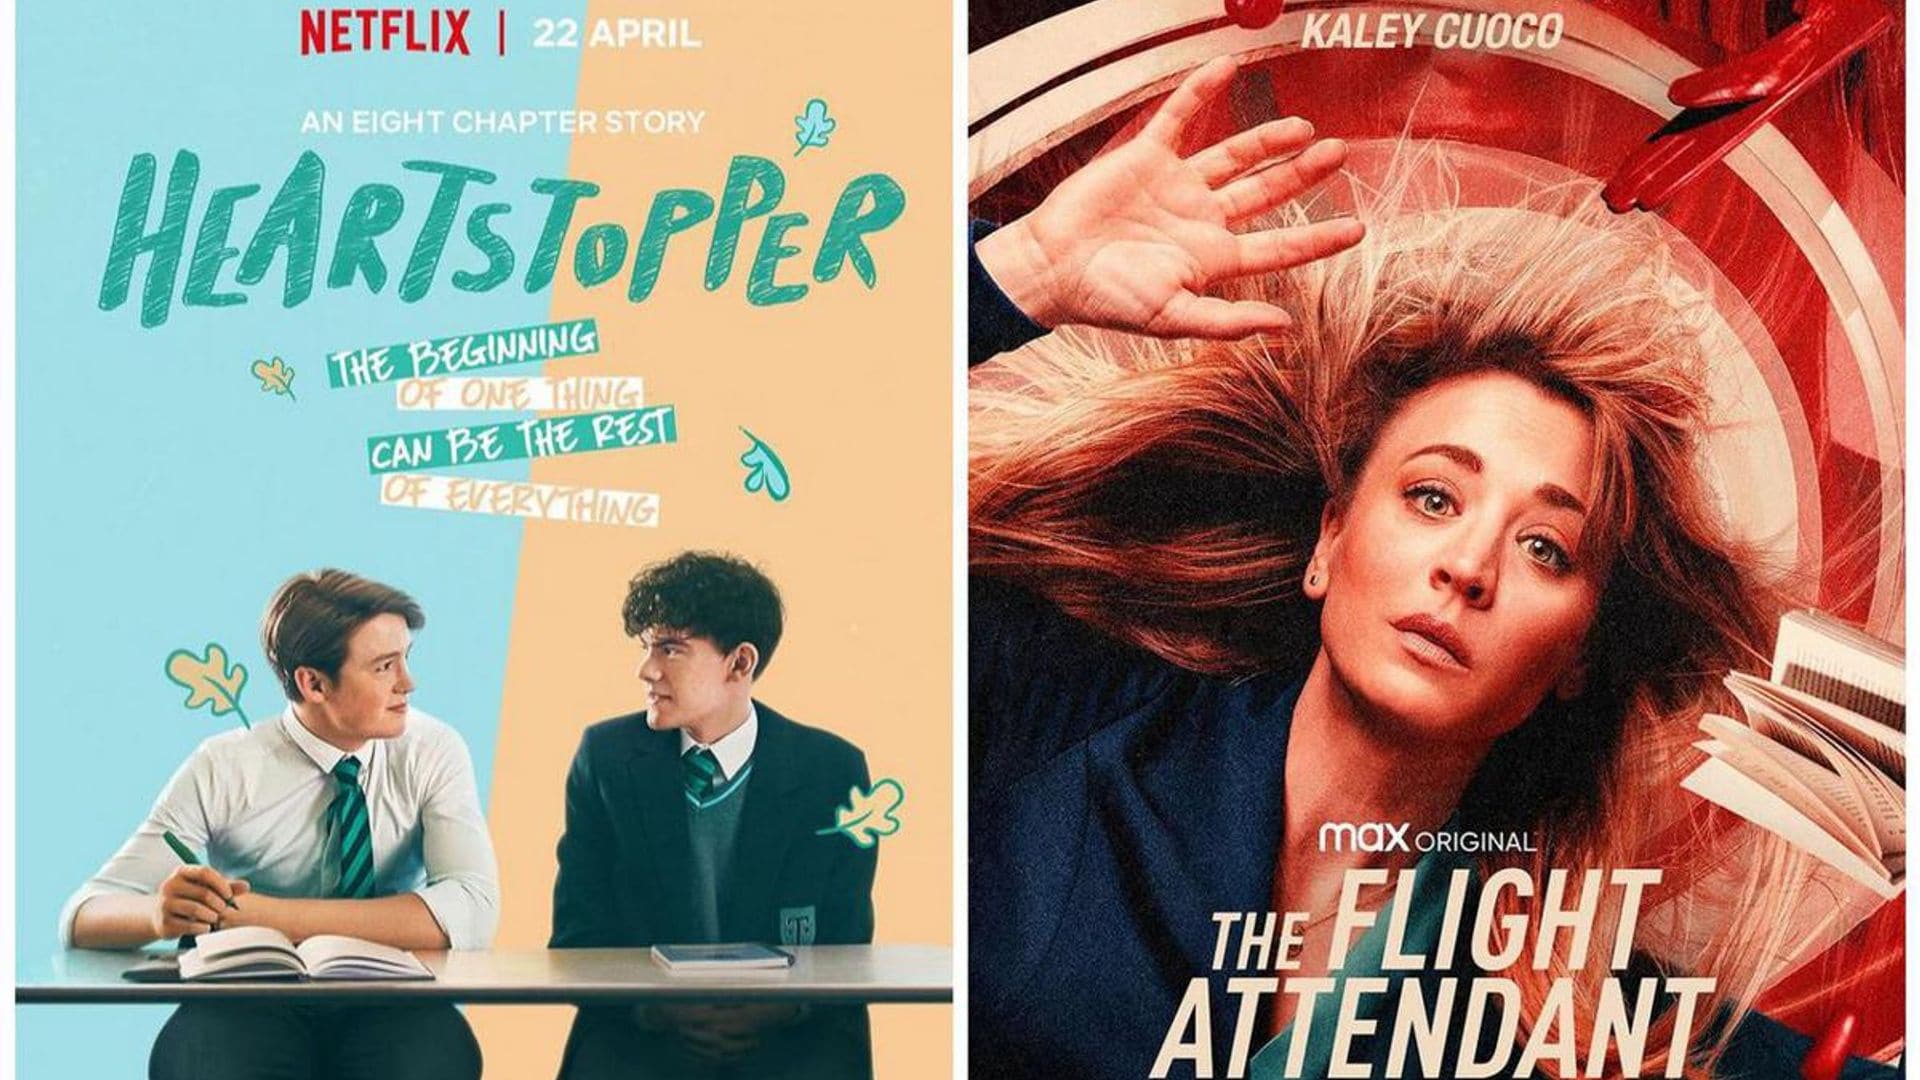 What to watch: 7 movies & shows to stream this week - April 22